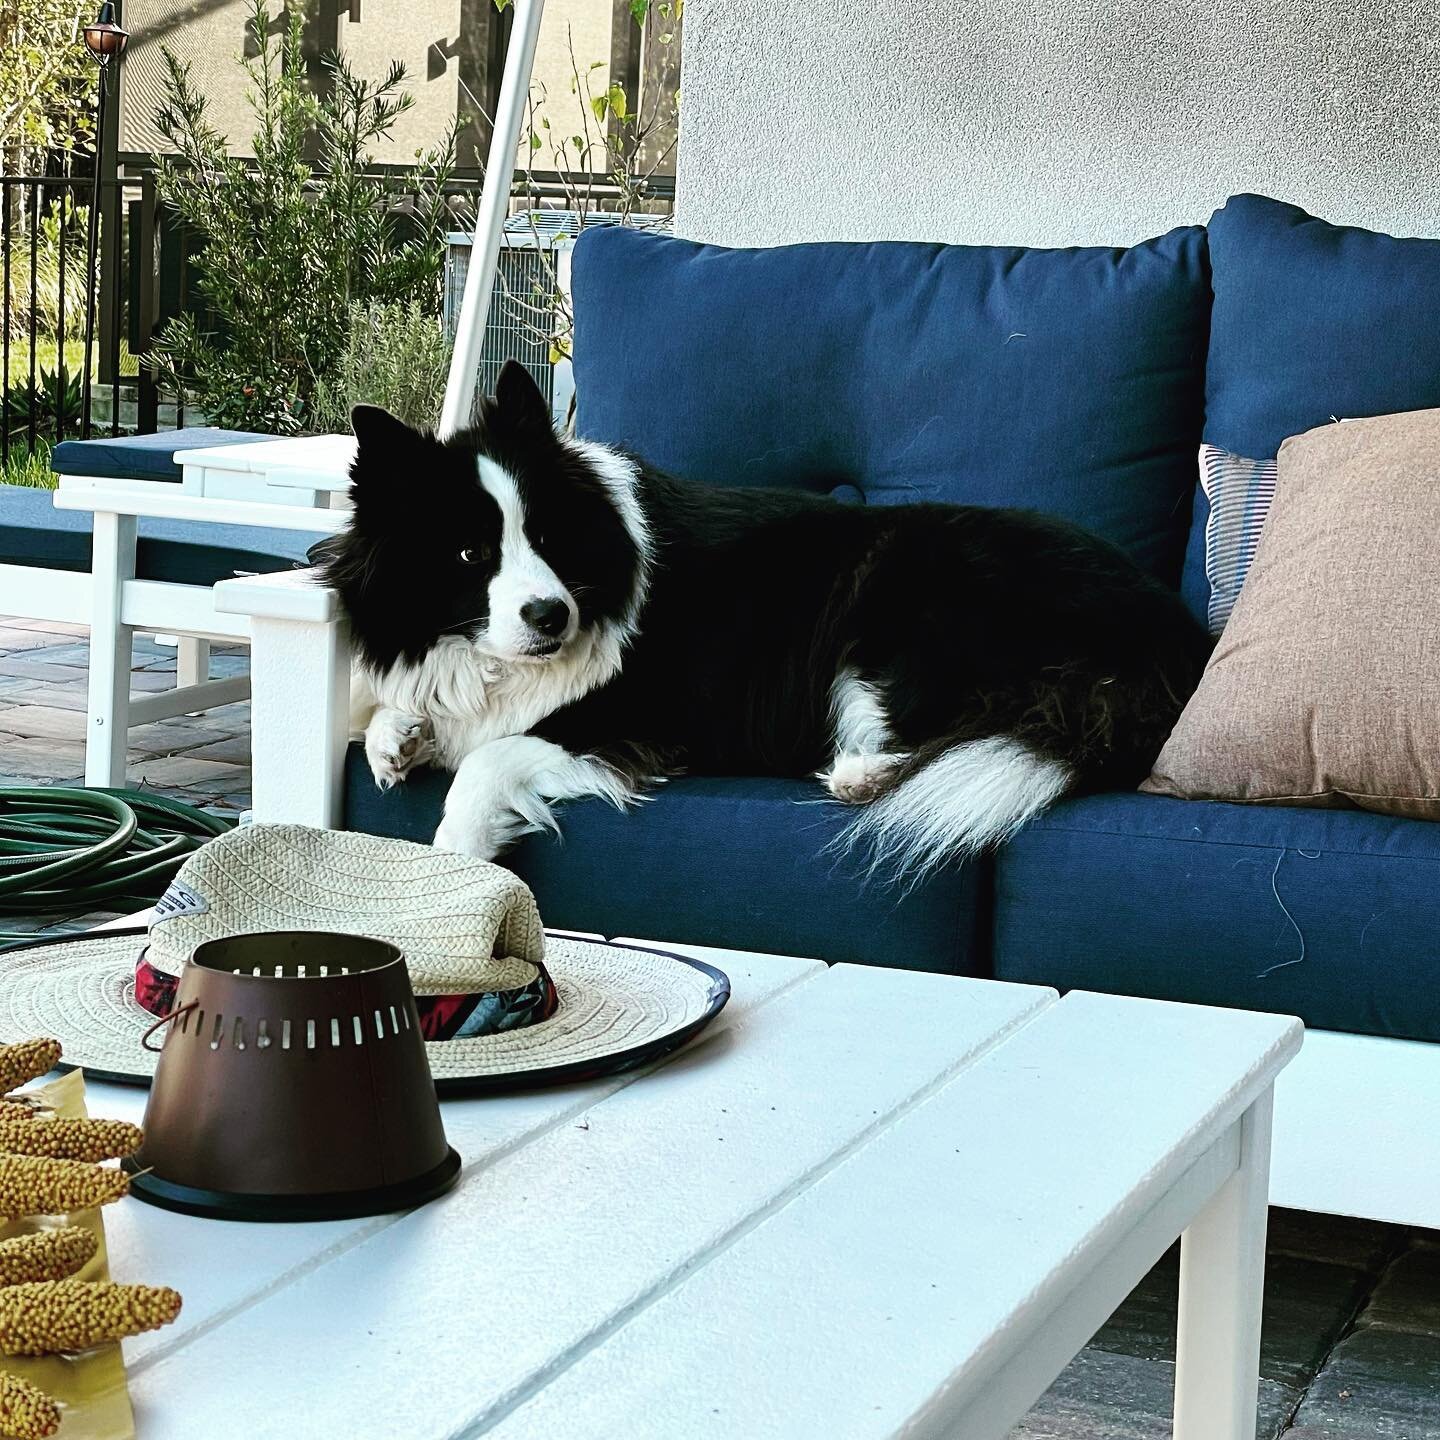 Sadie chilling out on the patio.  She loves it back here.  #bordercollie #dog